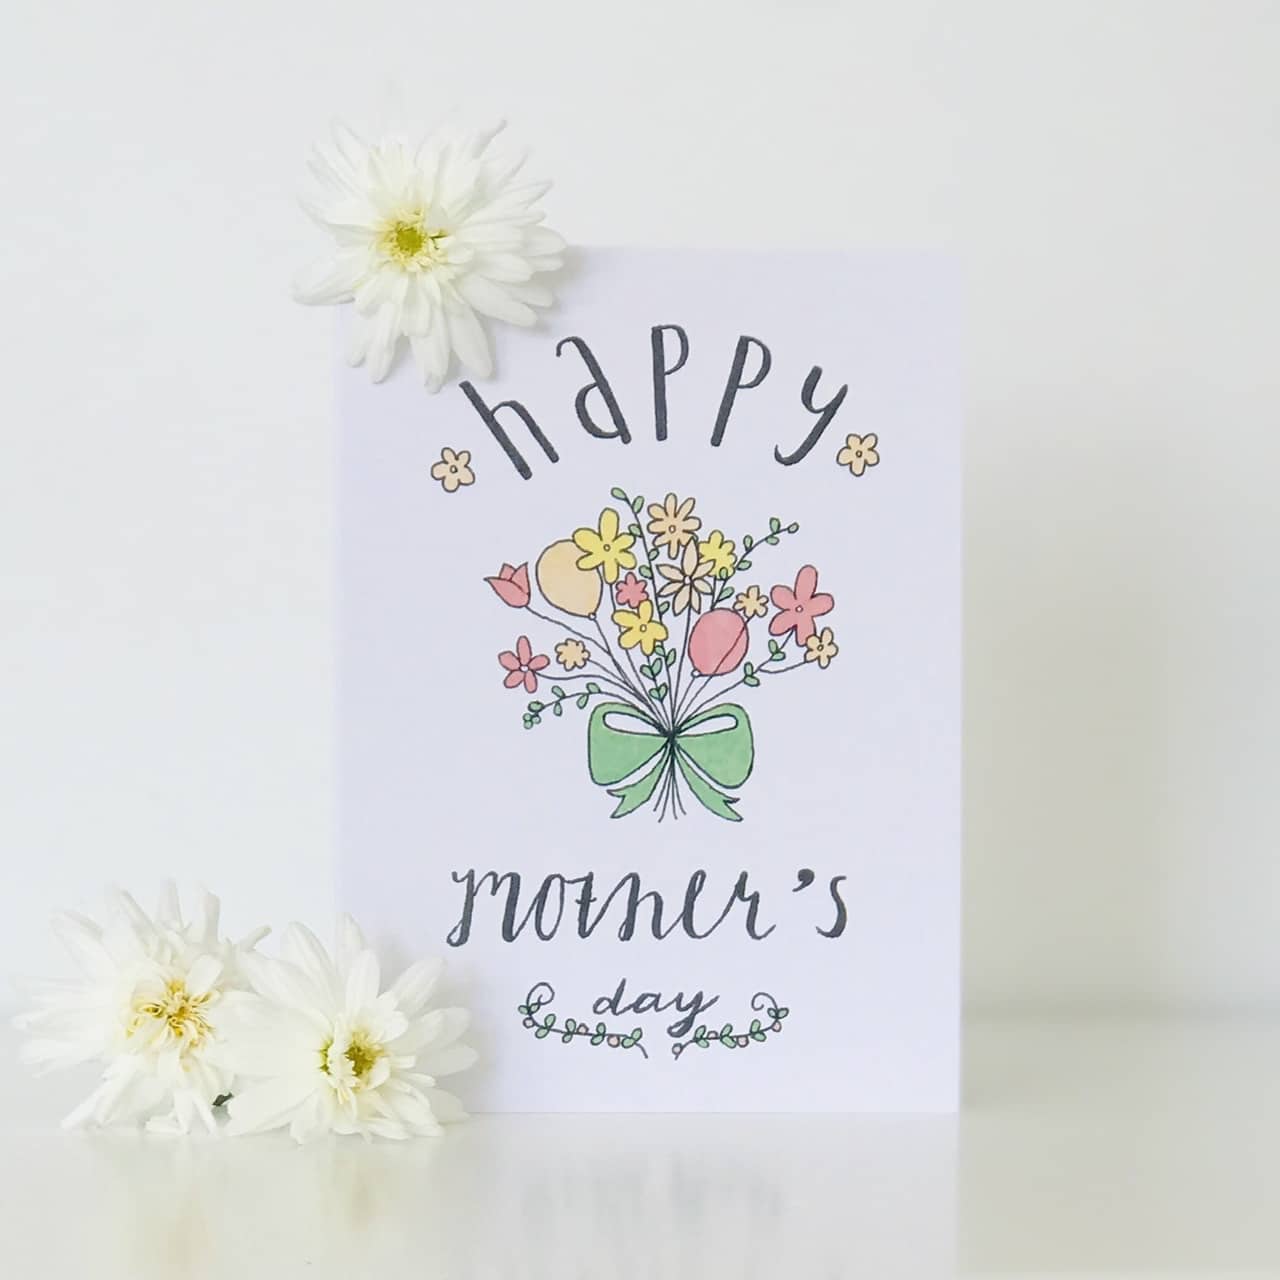 A charming Floral Mother's Day Card from Sweet Pea Creations with a floral design and calligraphy standing upright on a white surface, flanked by delicate white flowers.